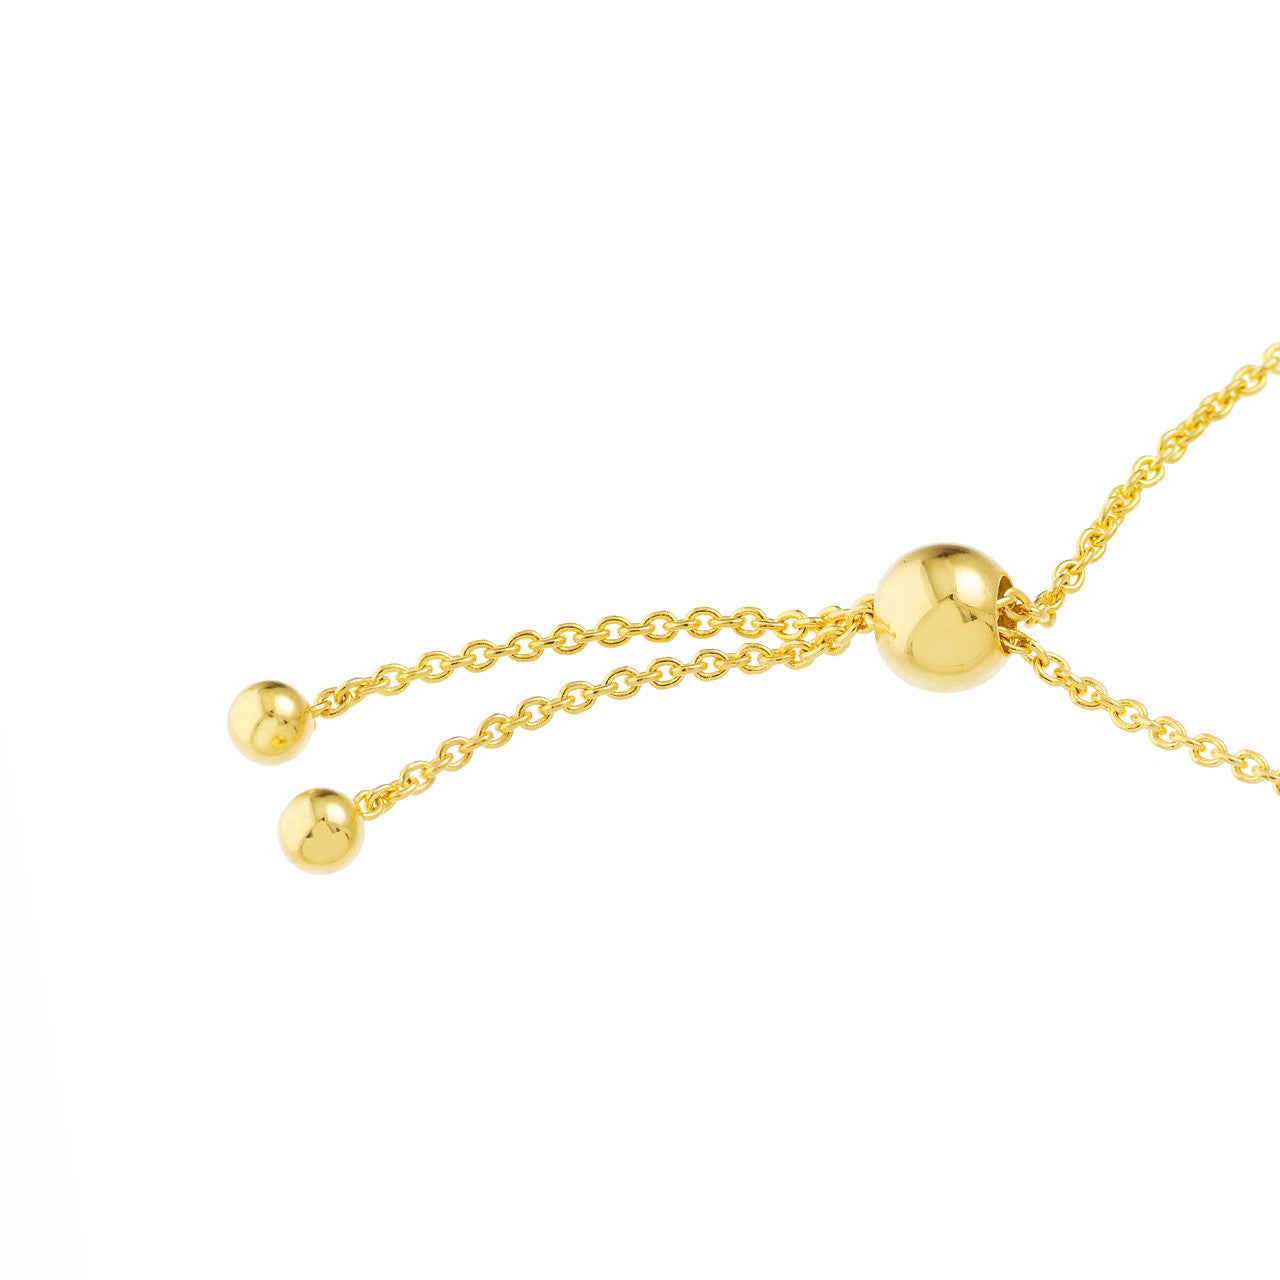 A gold ball and chain necklace